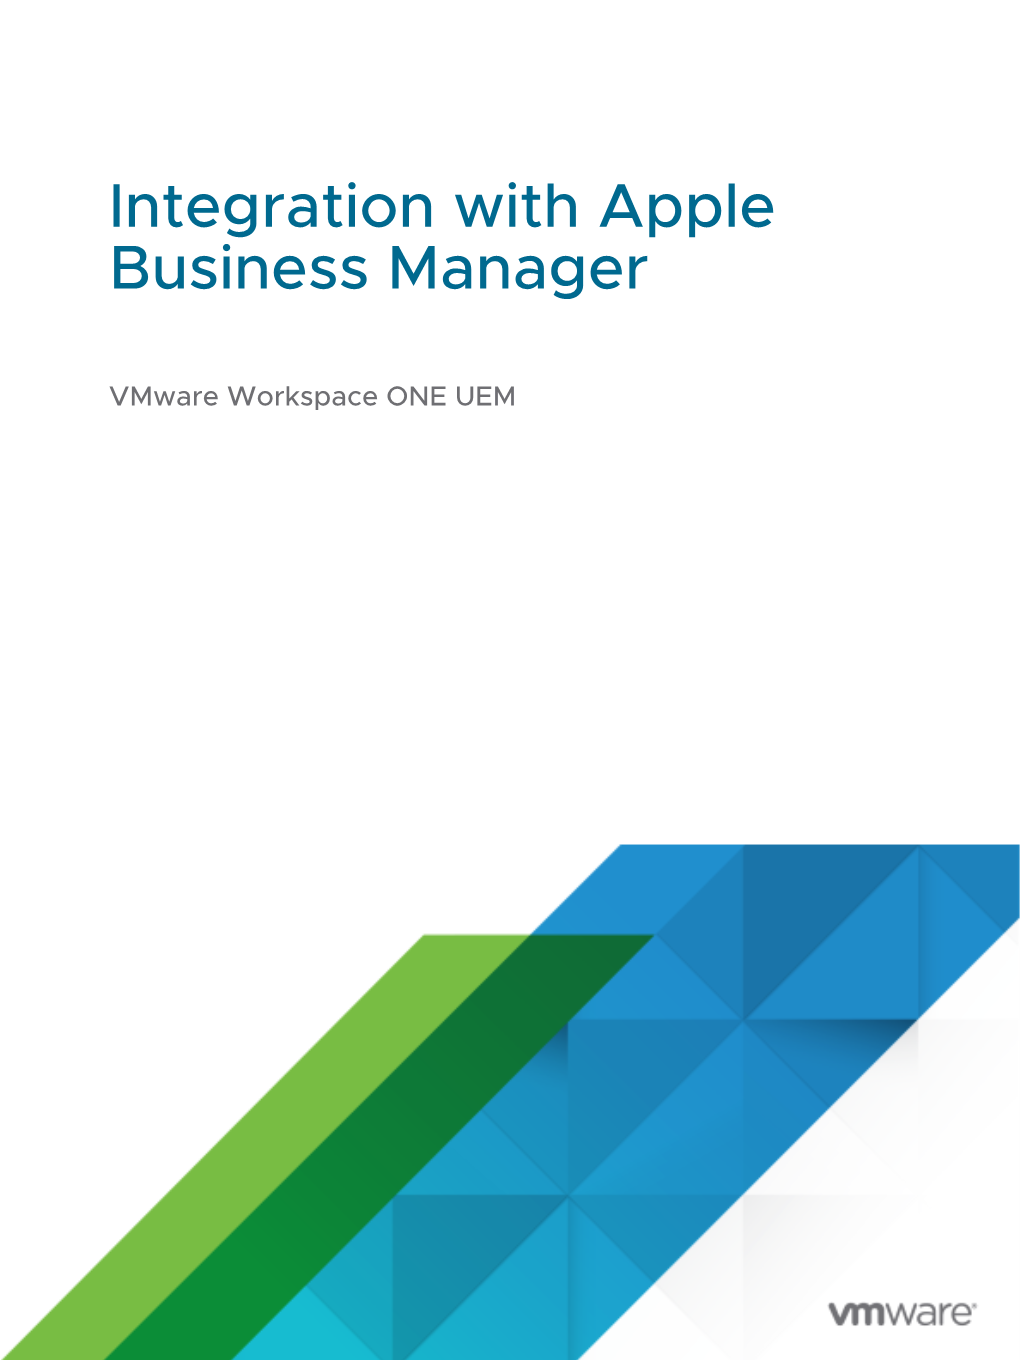 Integration with Apple Business Manager